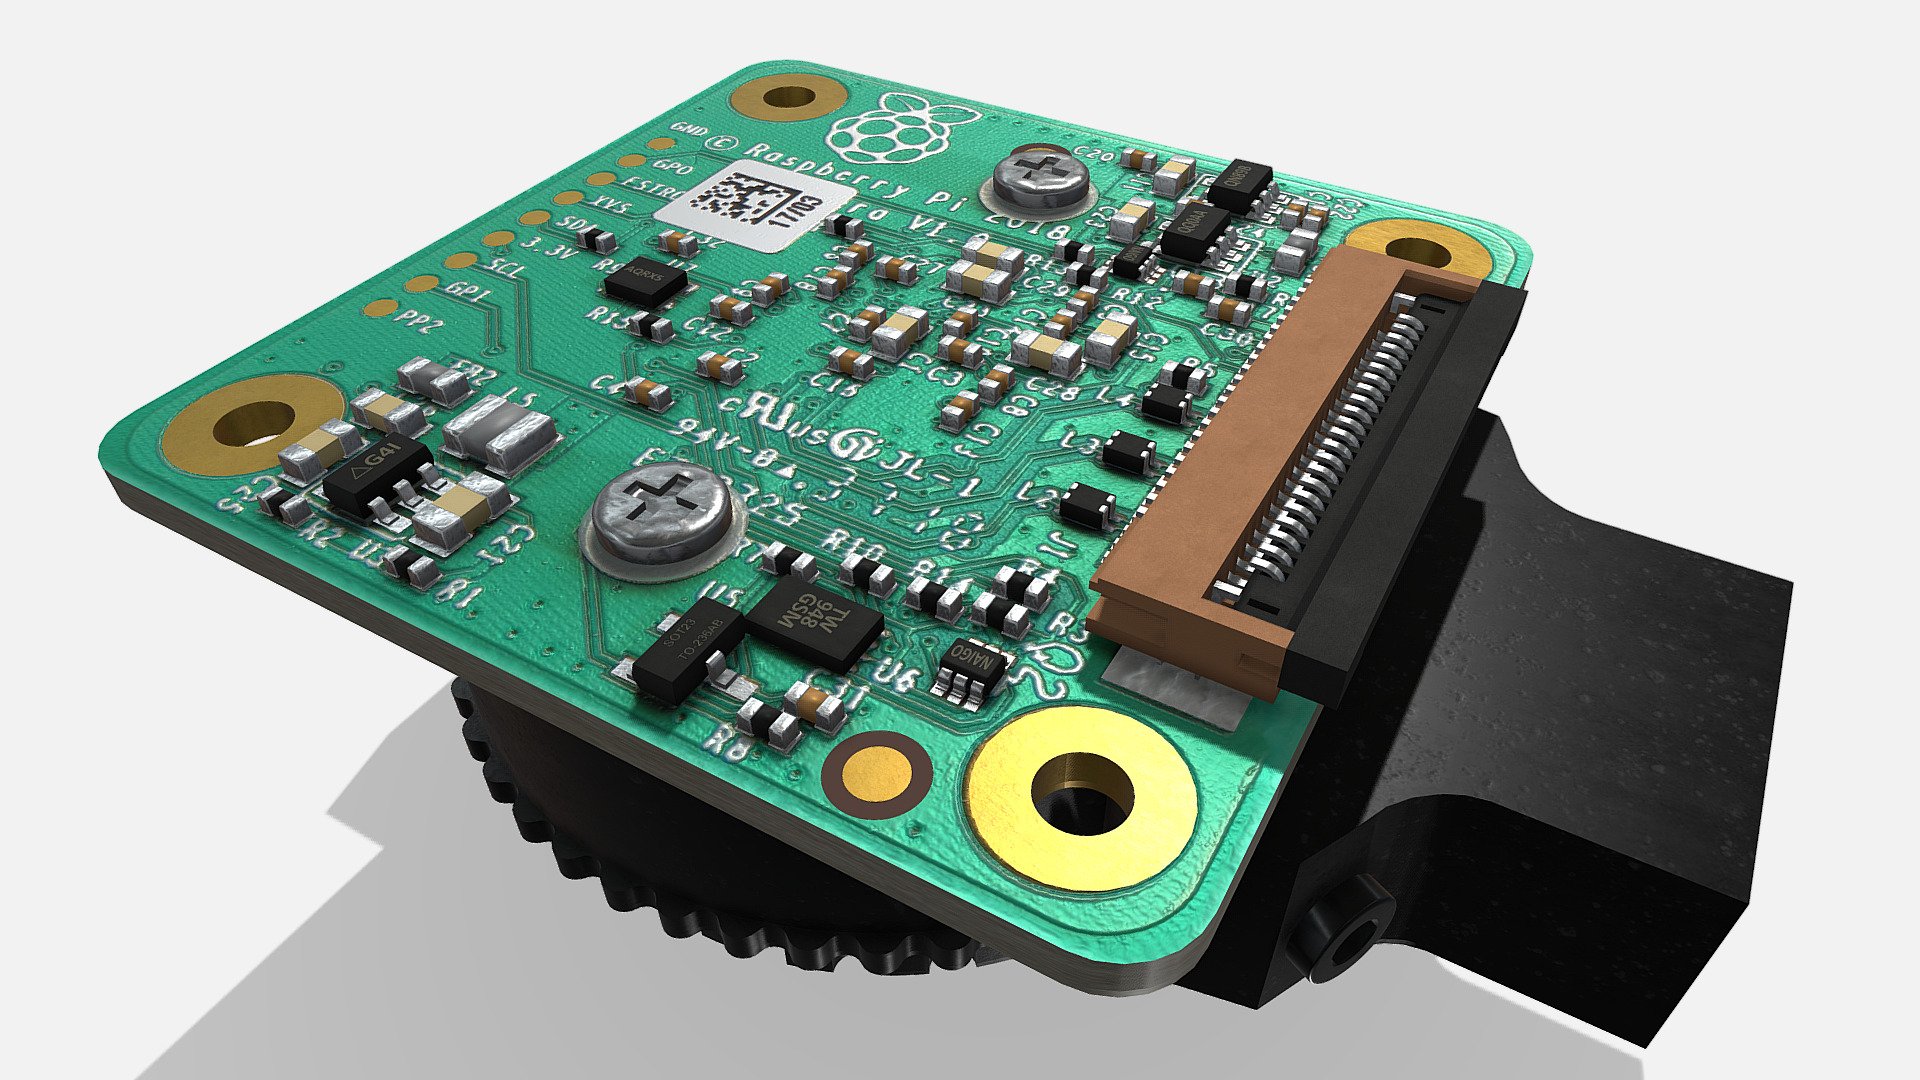 3d model of the new Raspberry Pi High Quality Camera. 
Description is visible here : https://www.raspberrypi.org/products/raspberry-pi-high-quality-camera/

Model designed from the Technical_Drawing.pdf file and with pictures.
https://static.raspberrypi.org/files/product-mechanical-drawings/20200428_HQ_Camera_Technical_drawing.pdf

All components can be modified (translate, delete,…). Don’t hesitate to comment somes hardware references that you want to see in sketchfab 3d model